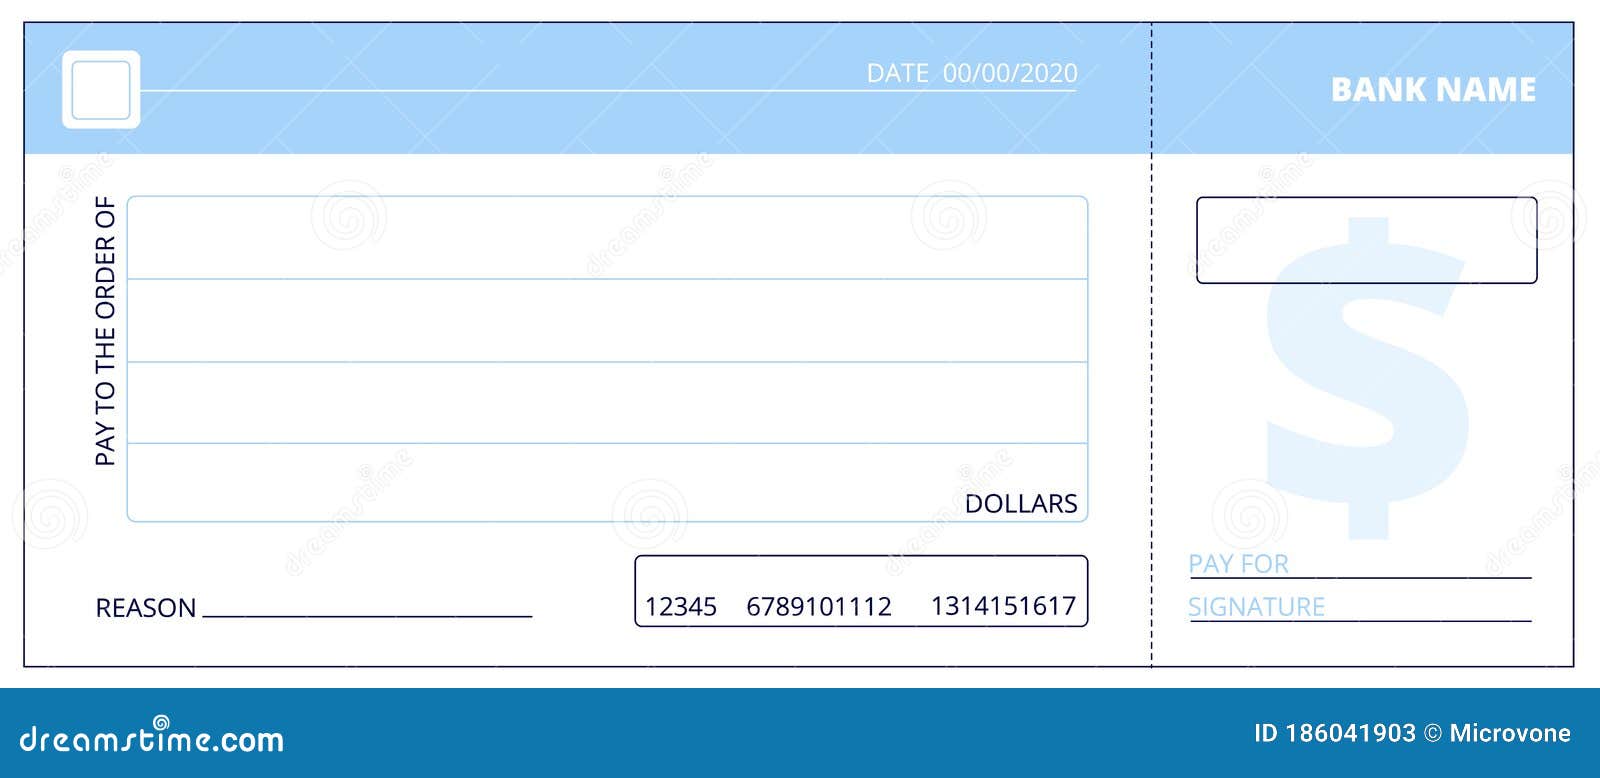 Blank Business Check Template from thumbs.dreamstime.com